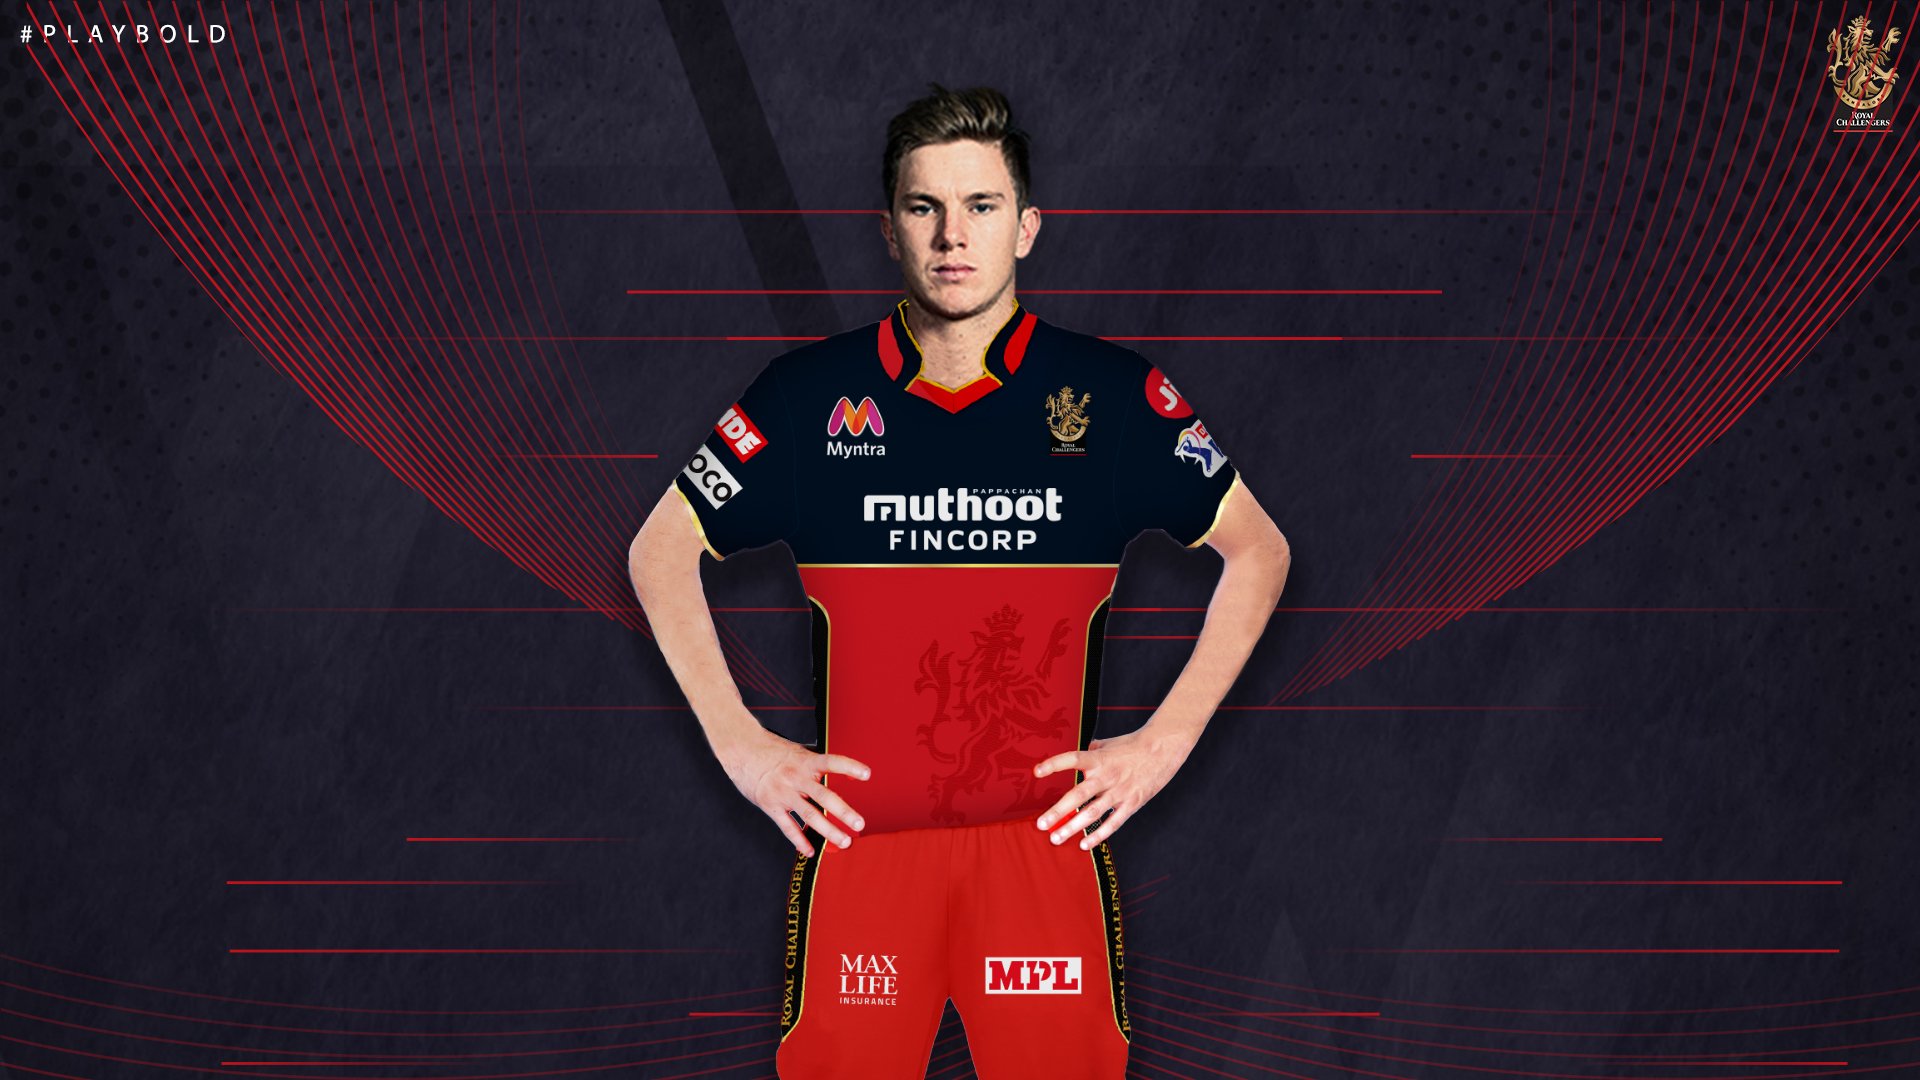 RCB Update: Kane Richerdson has stepped out of IPL 2020 and replaced with Adam Zampa